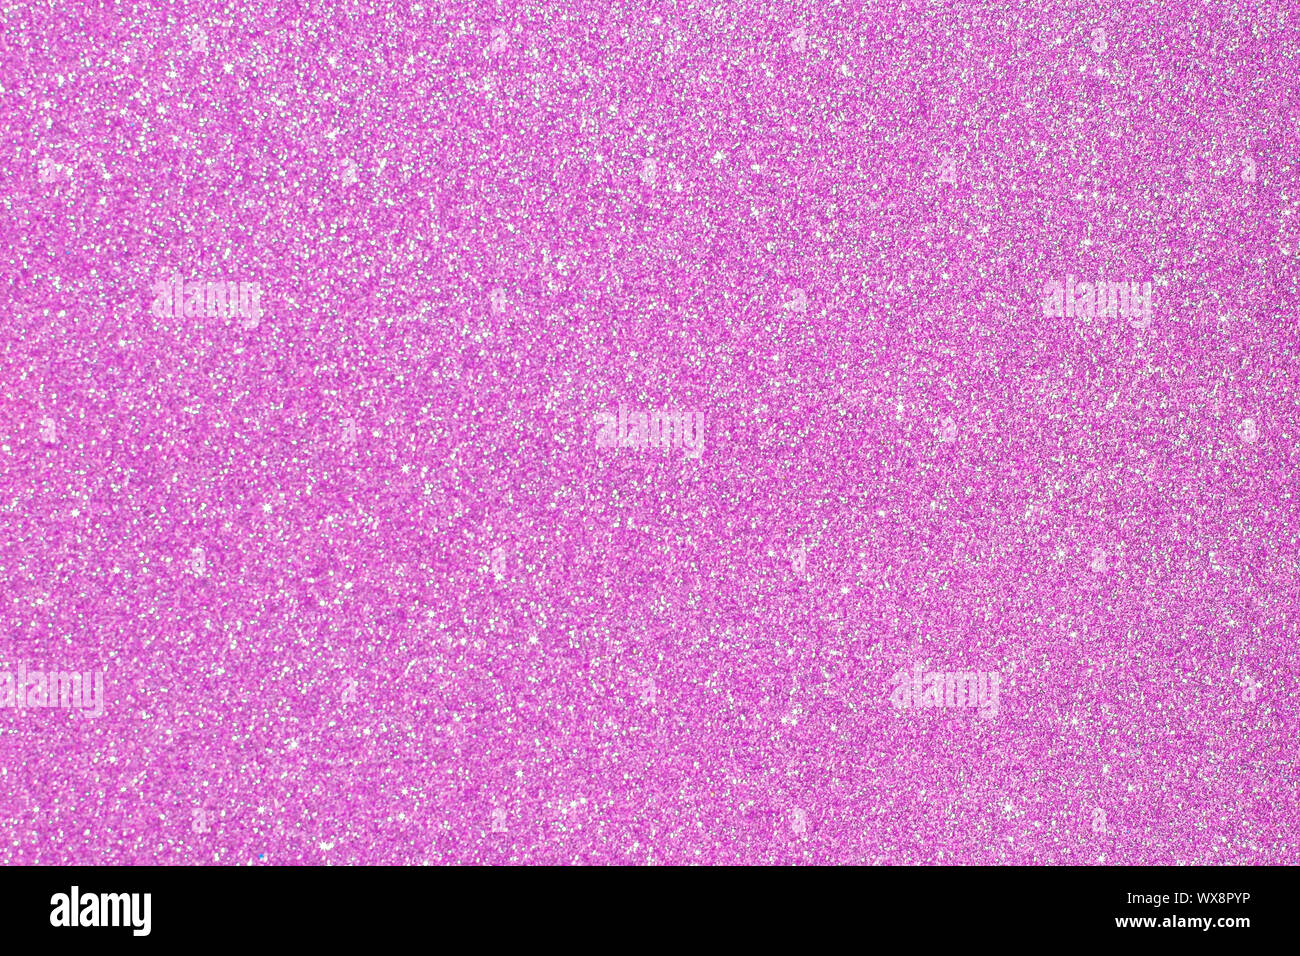 Pink glitter for texture or background with copy space Stock Photo